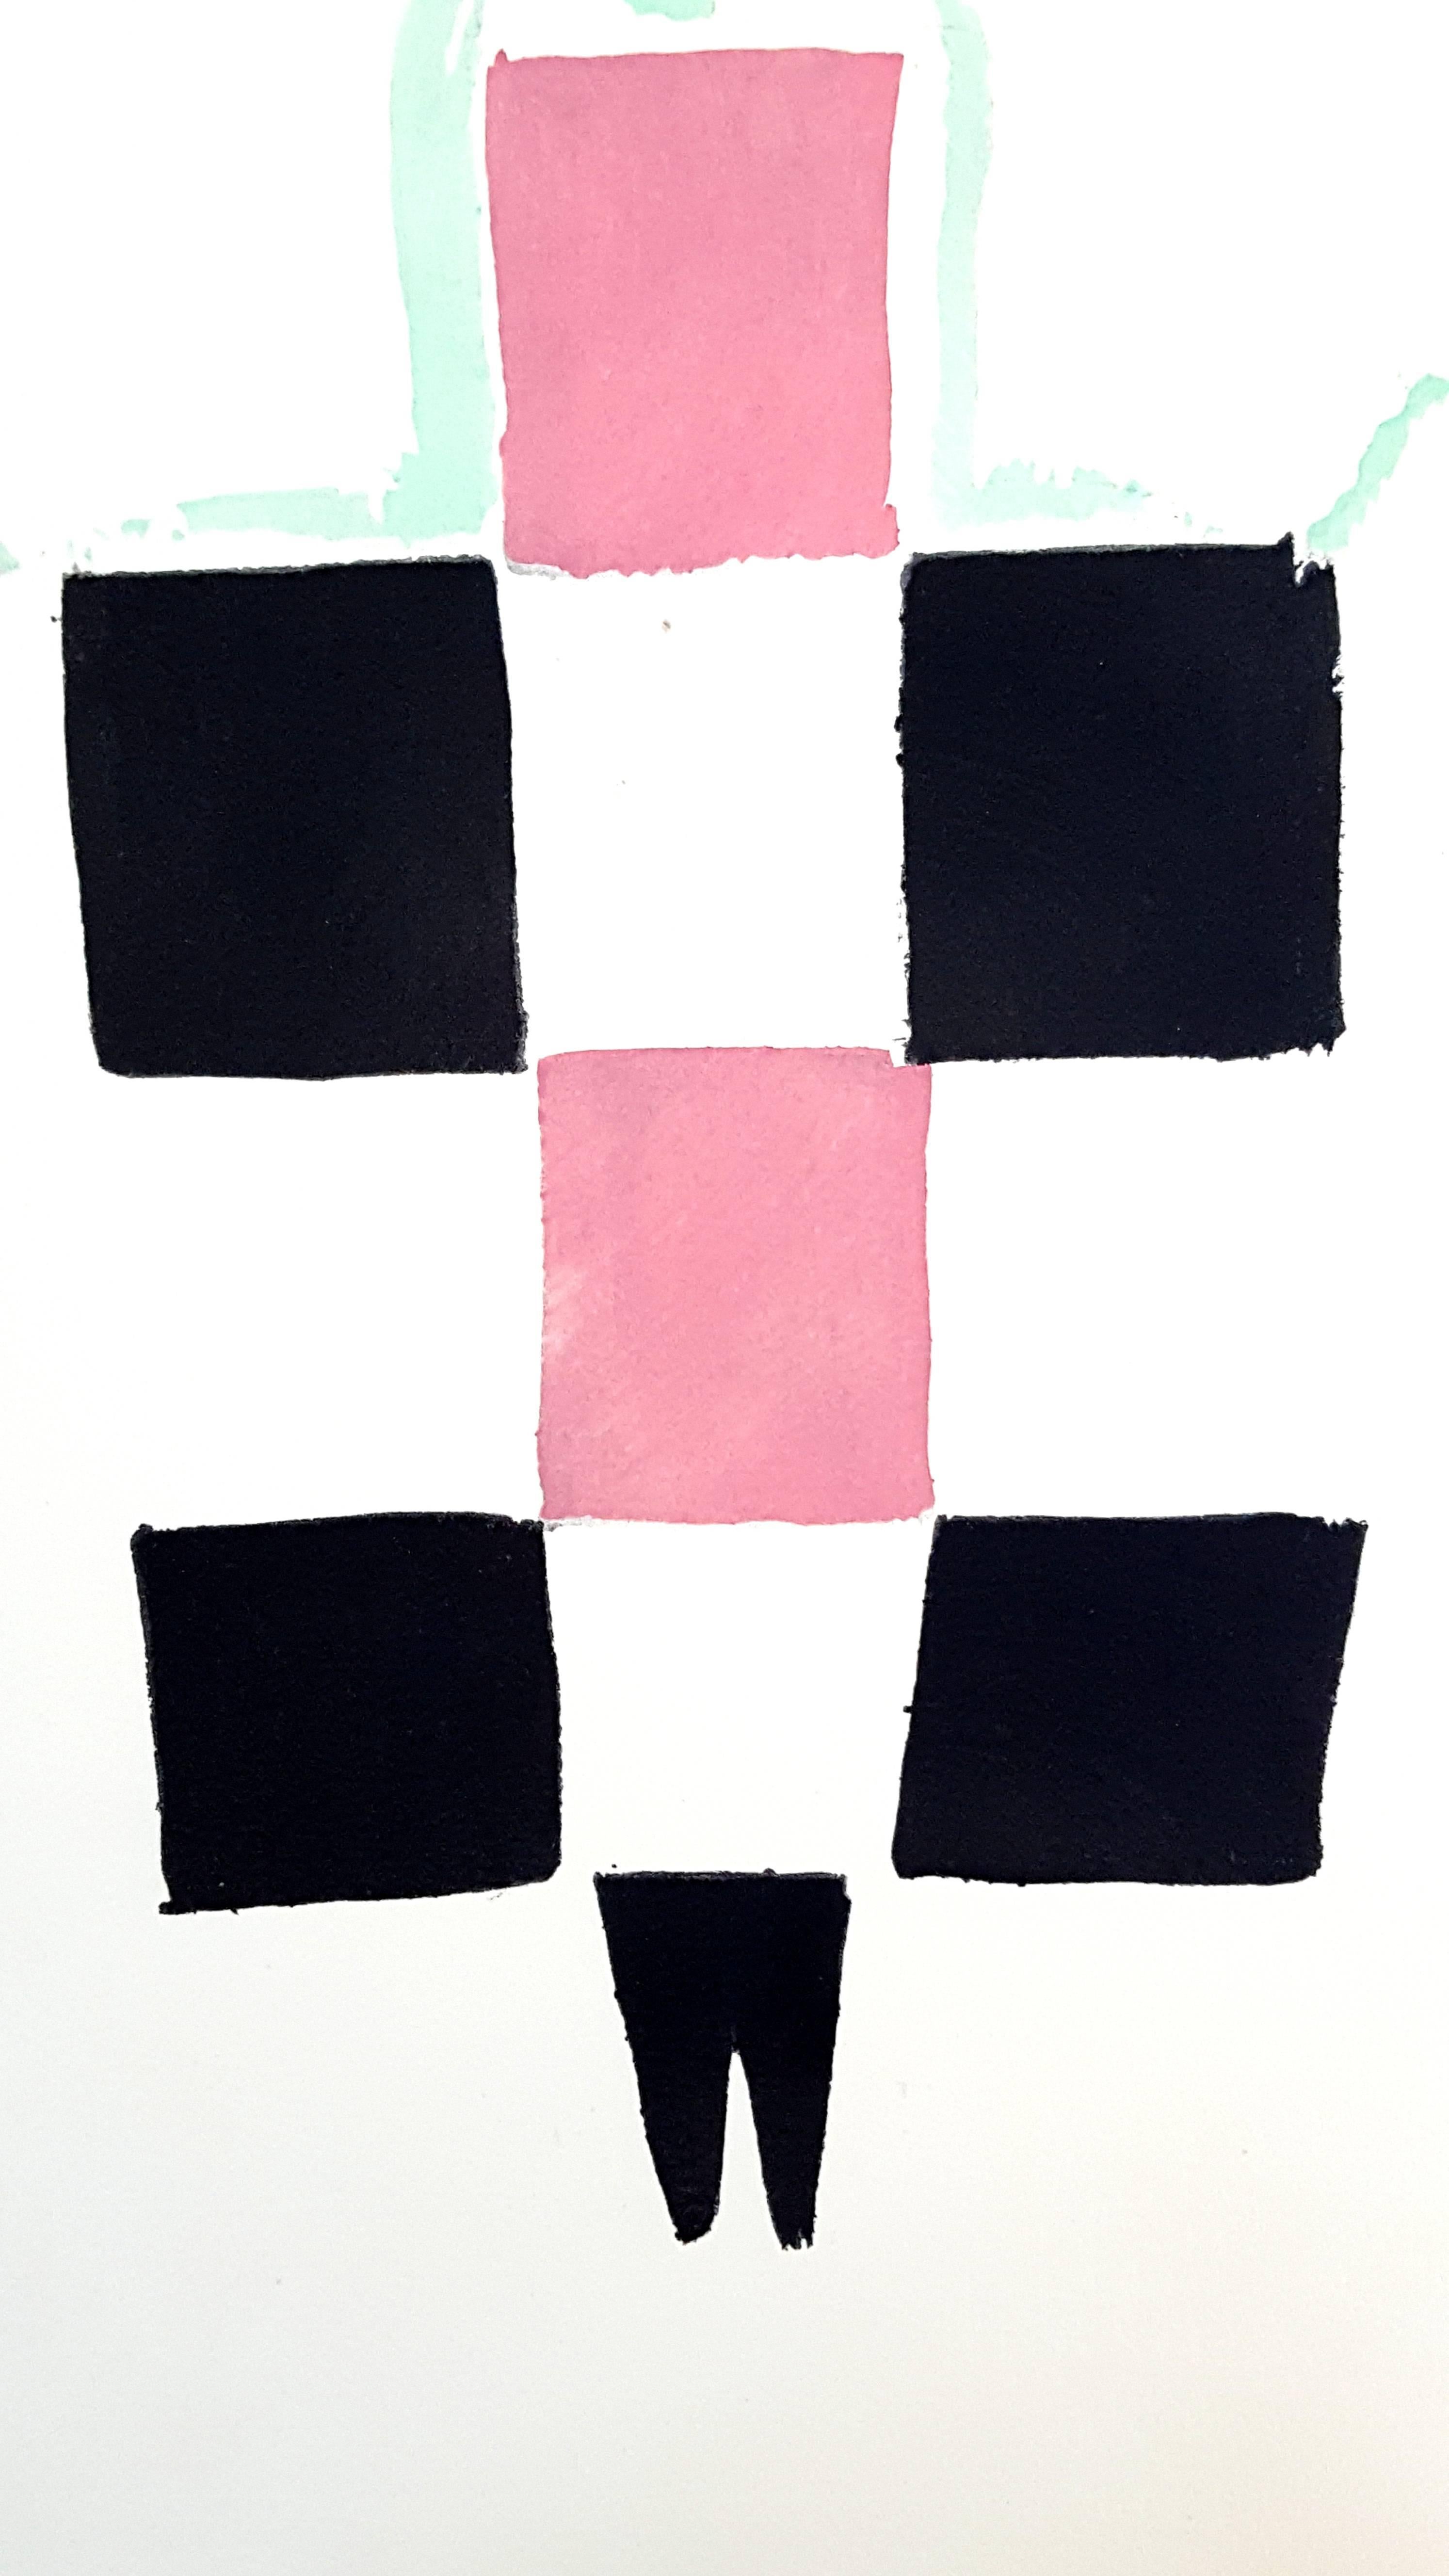 Full-page, colour pochoir of costume designs after Sonia Delaunay-Terk's original drawings.
Edition 331/500 copies on Velin Aussedat 
Dimensions: 28.5 x 19.5 cm.
From 27 Living Paintings. [Milano, Edizioni del Naviglio, 1969]. Jacques Damase. Robes